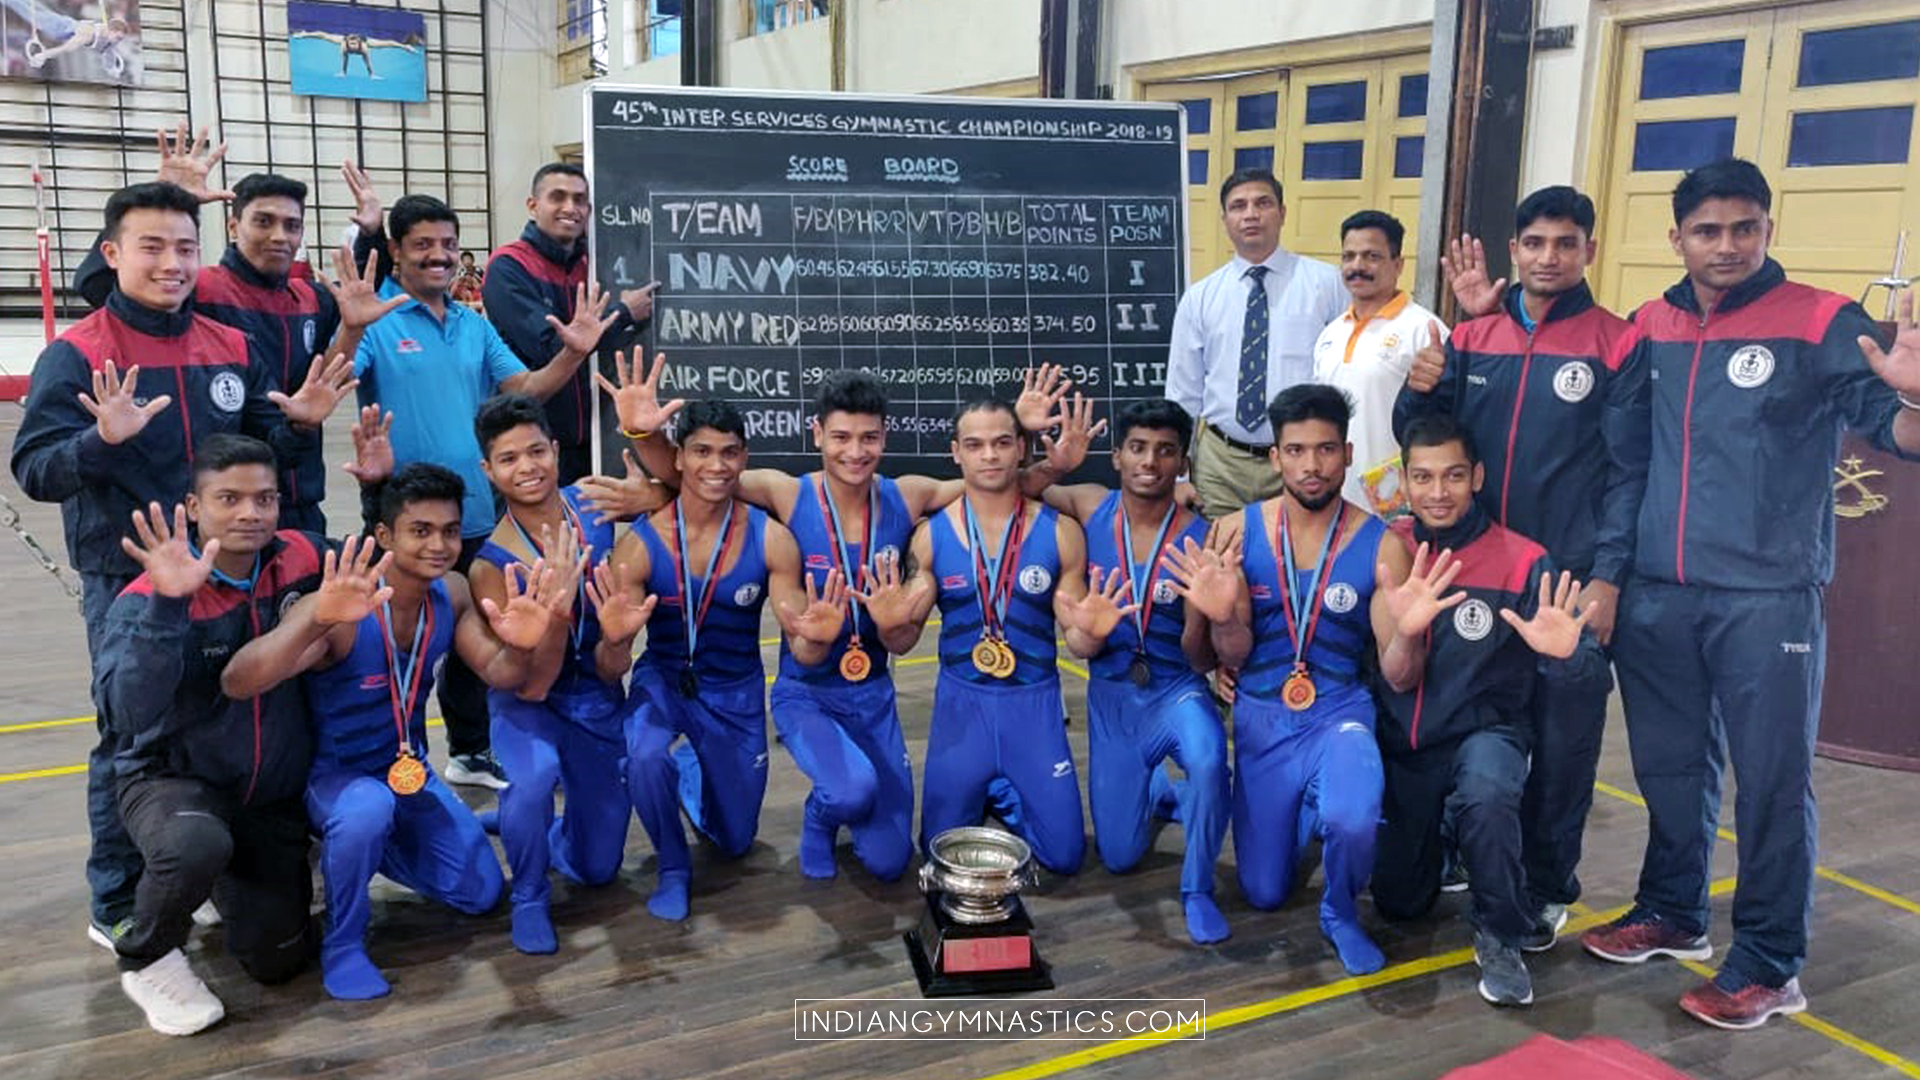 Navy wins their 10th consecutive Inter-Services Gymnastics Championships Title